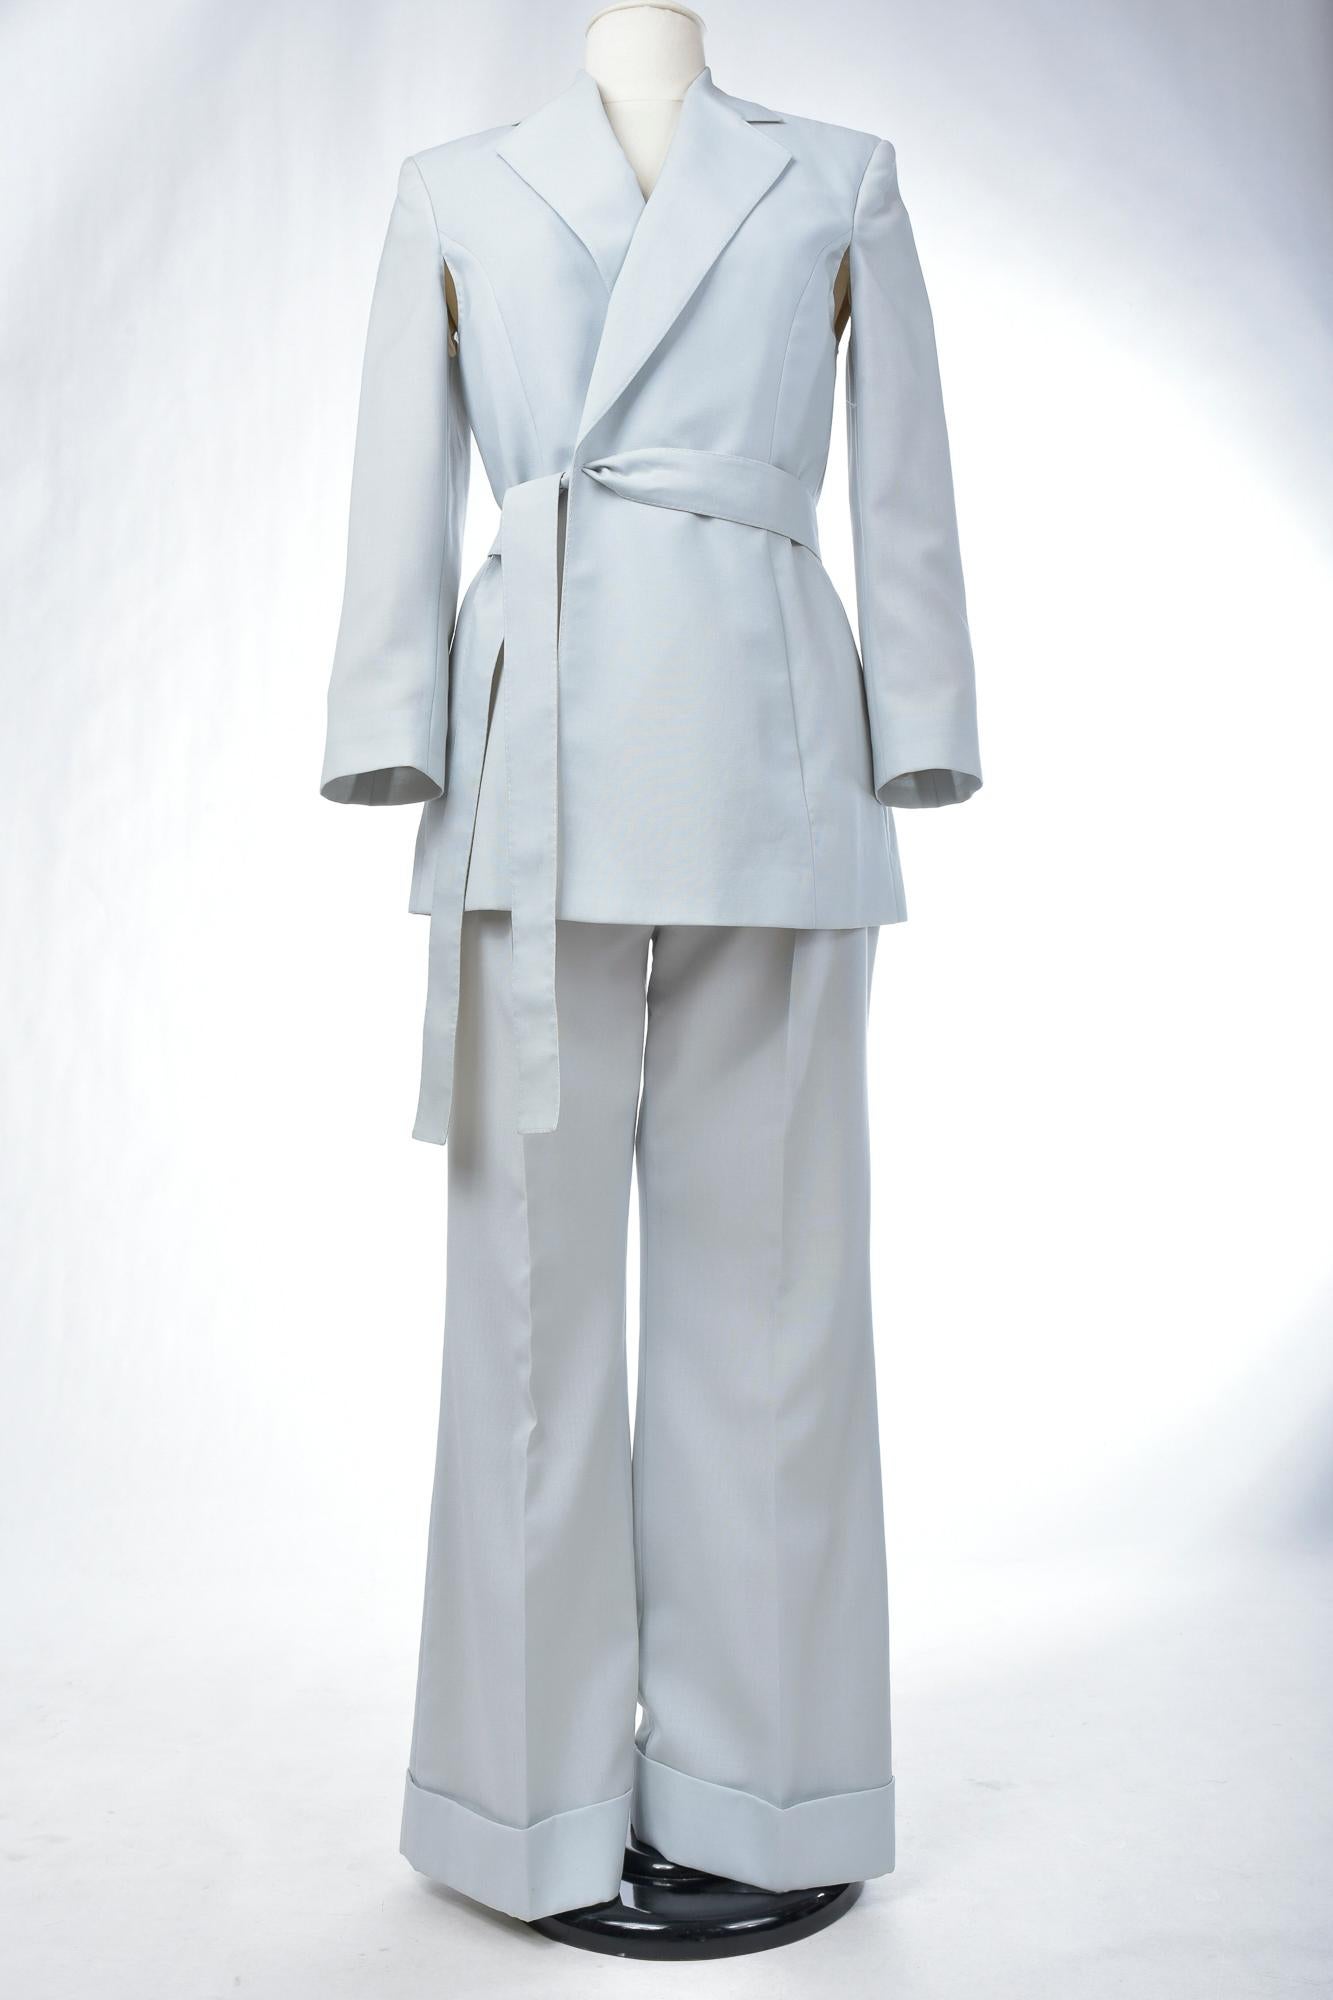 An Ice blue Tuxedo Pant Suit by Gianfranco Ferre - Italy Circa 1995 - 2000 For Sale 2